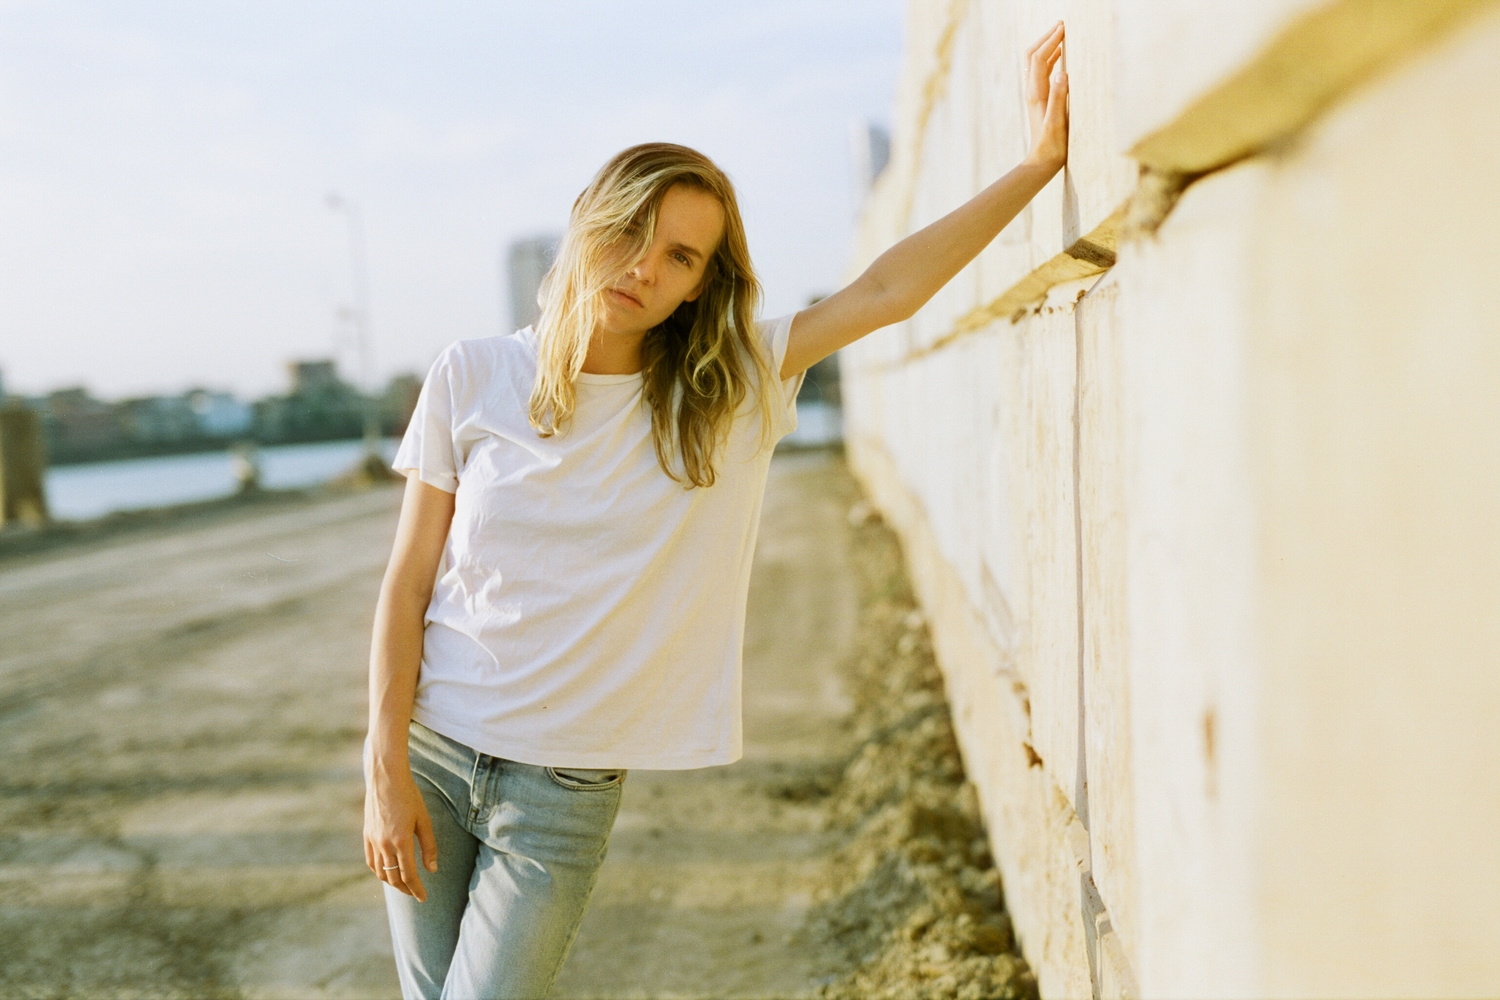 The Japanese House shares ‘Good Side In’ from her new EP